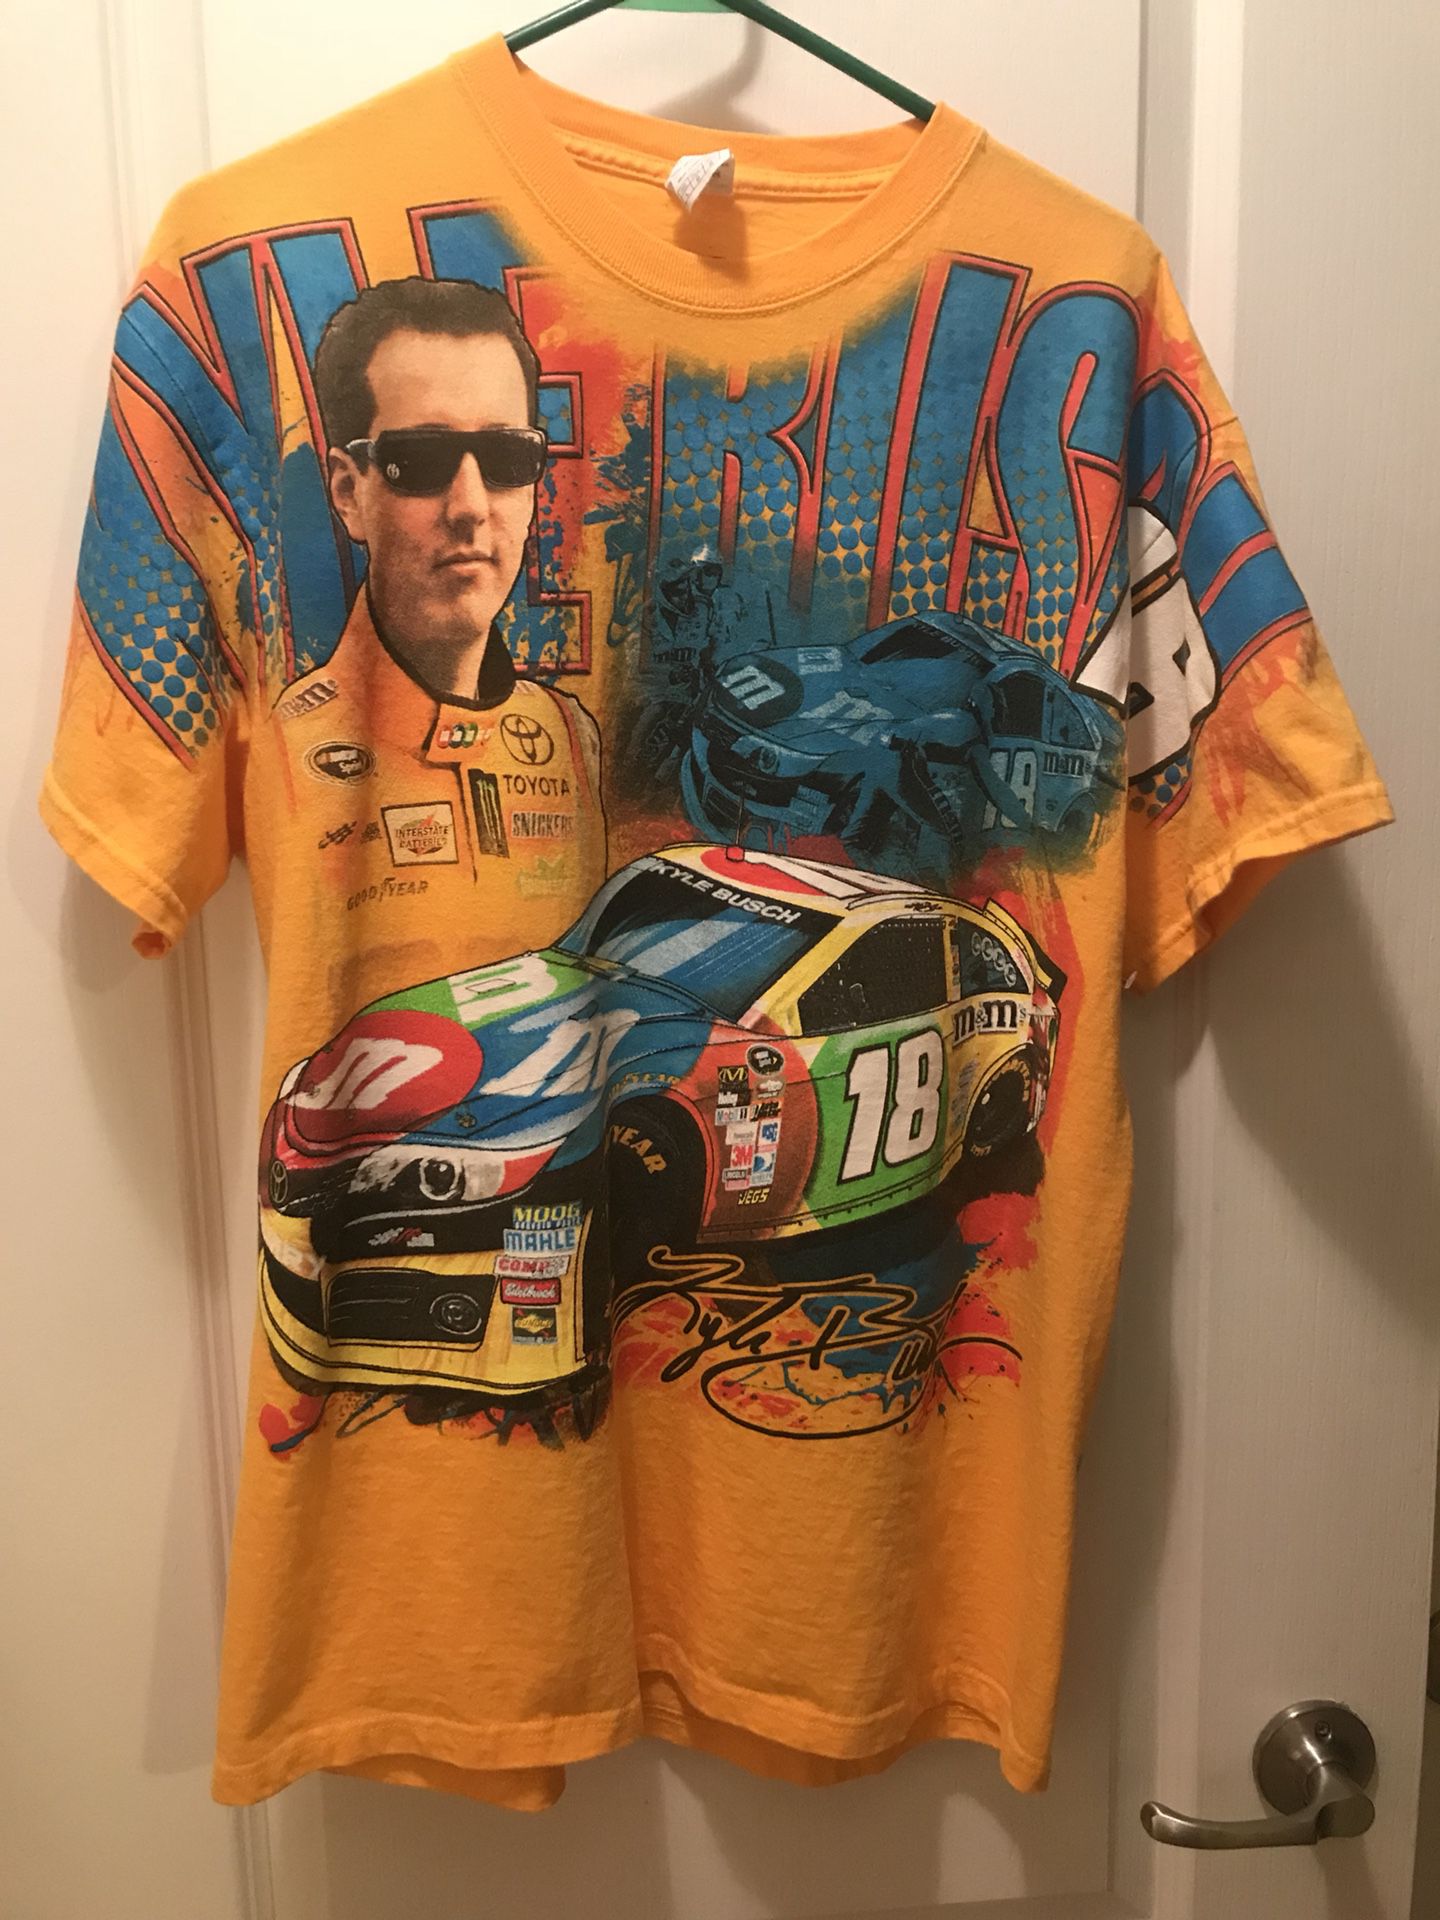 ADULT LARGE KYLE BUSCH #18 Nascar Shirt Brand new with tags